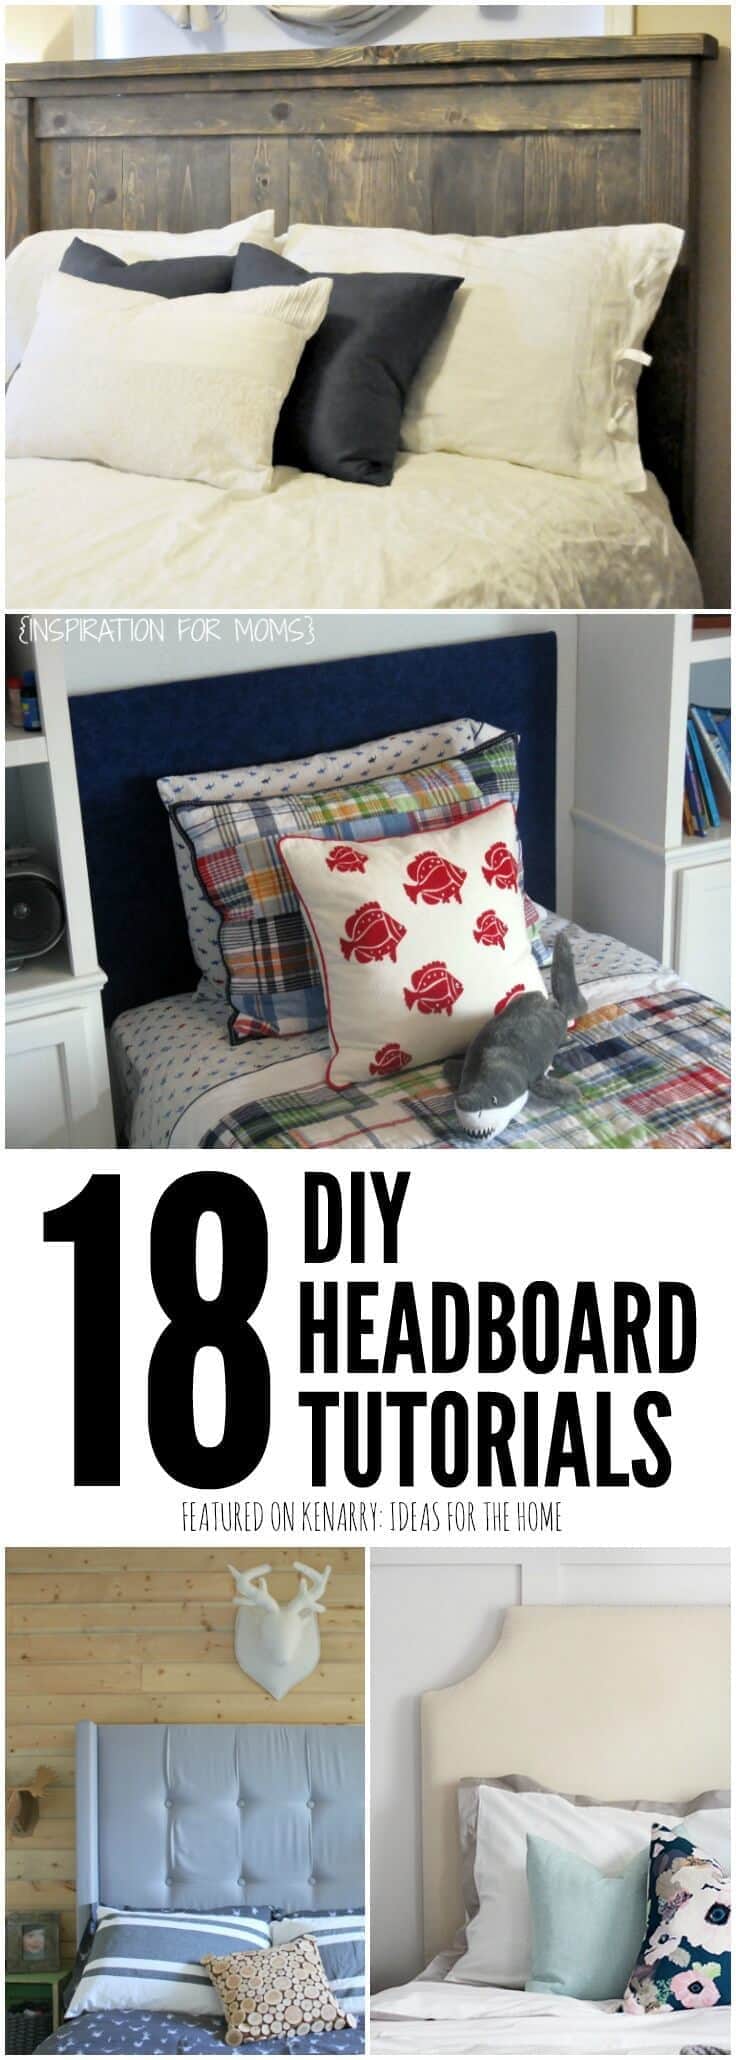 I've always wanted to make my own headboard for our bedroom. These DIY headboard tutorials make it look so easy -- and budget-friendly too!